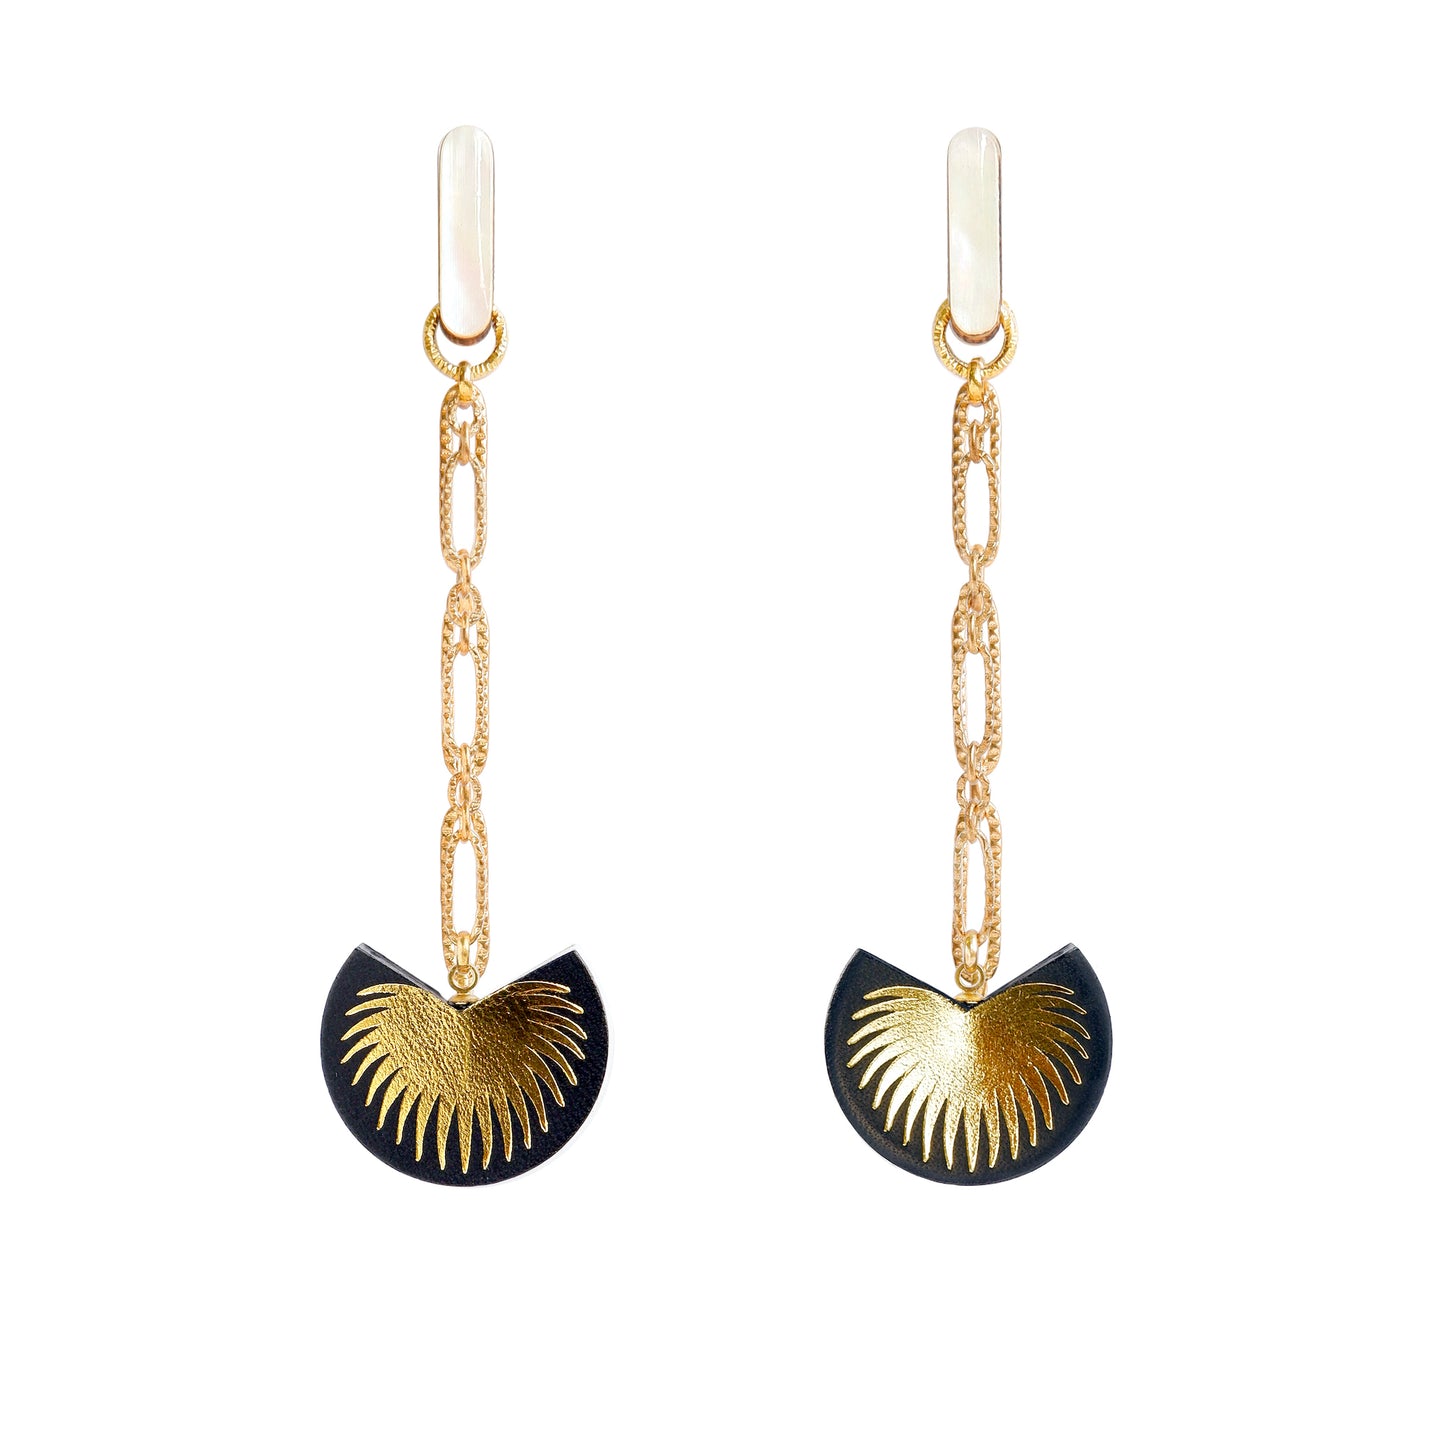 palm tree drop earrings. black leather medallions with gold palm print, on longl-link chain from long mother of pearl studs